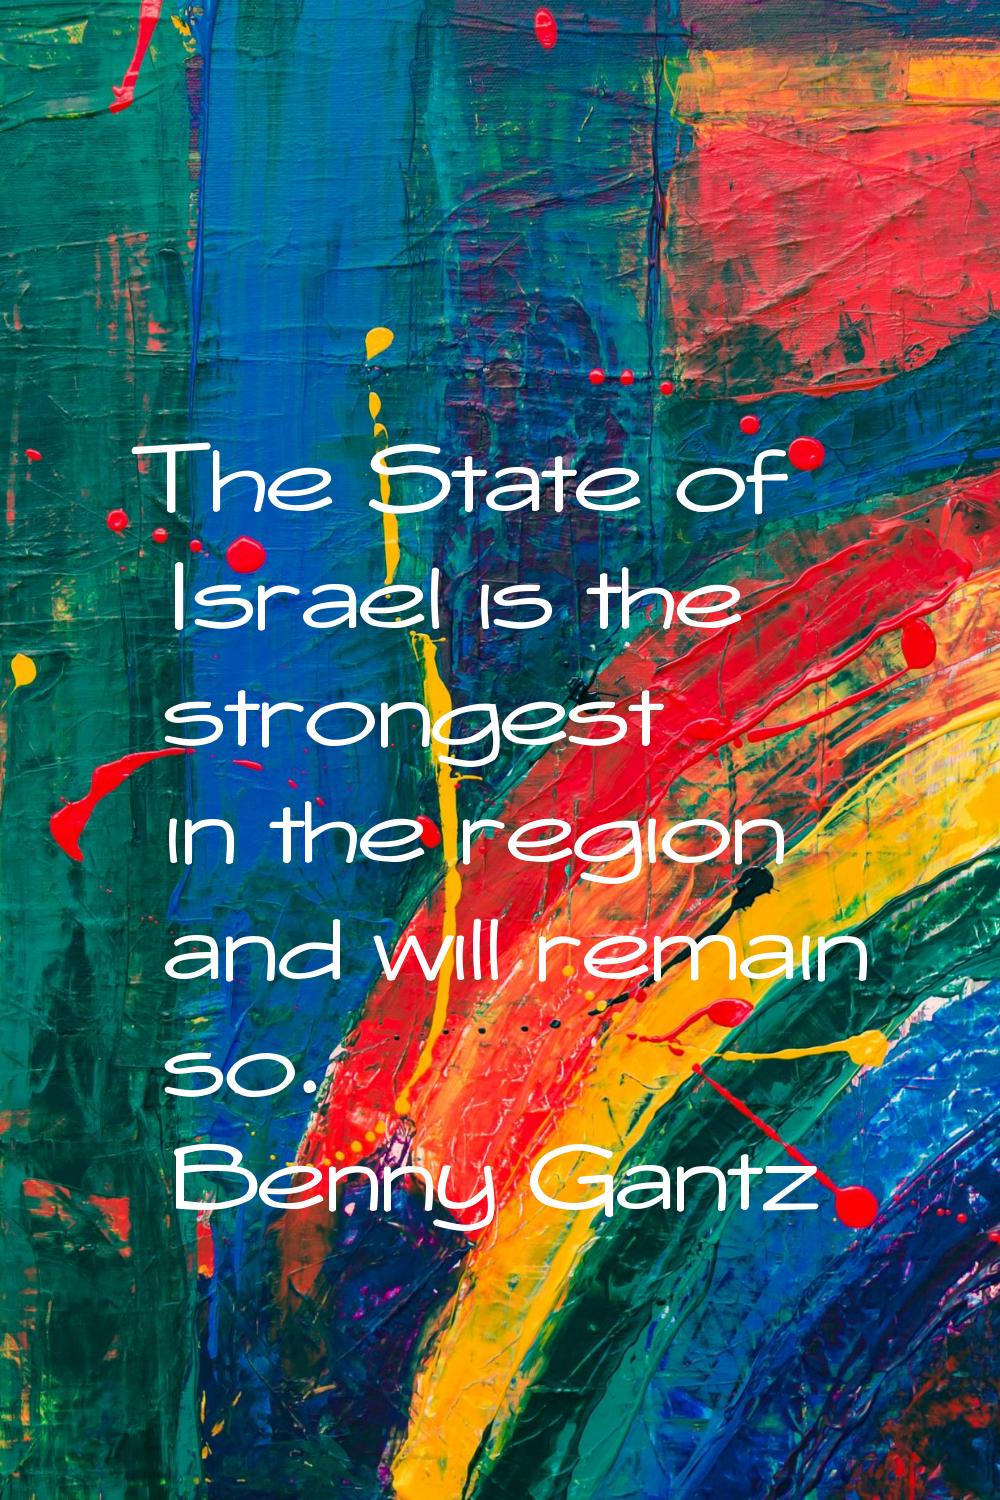 The State of Israel is the strongest in the region and will remain so.